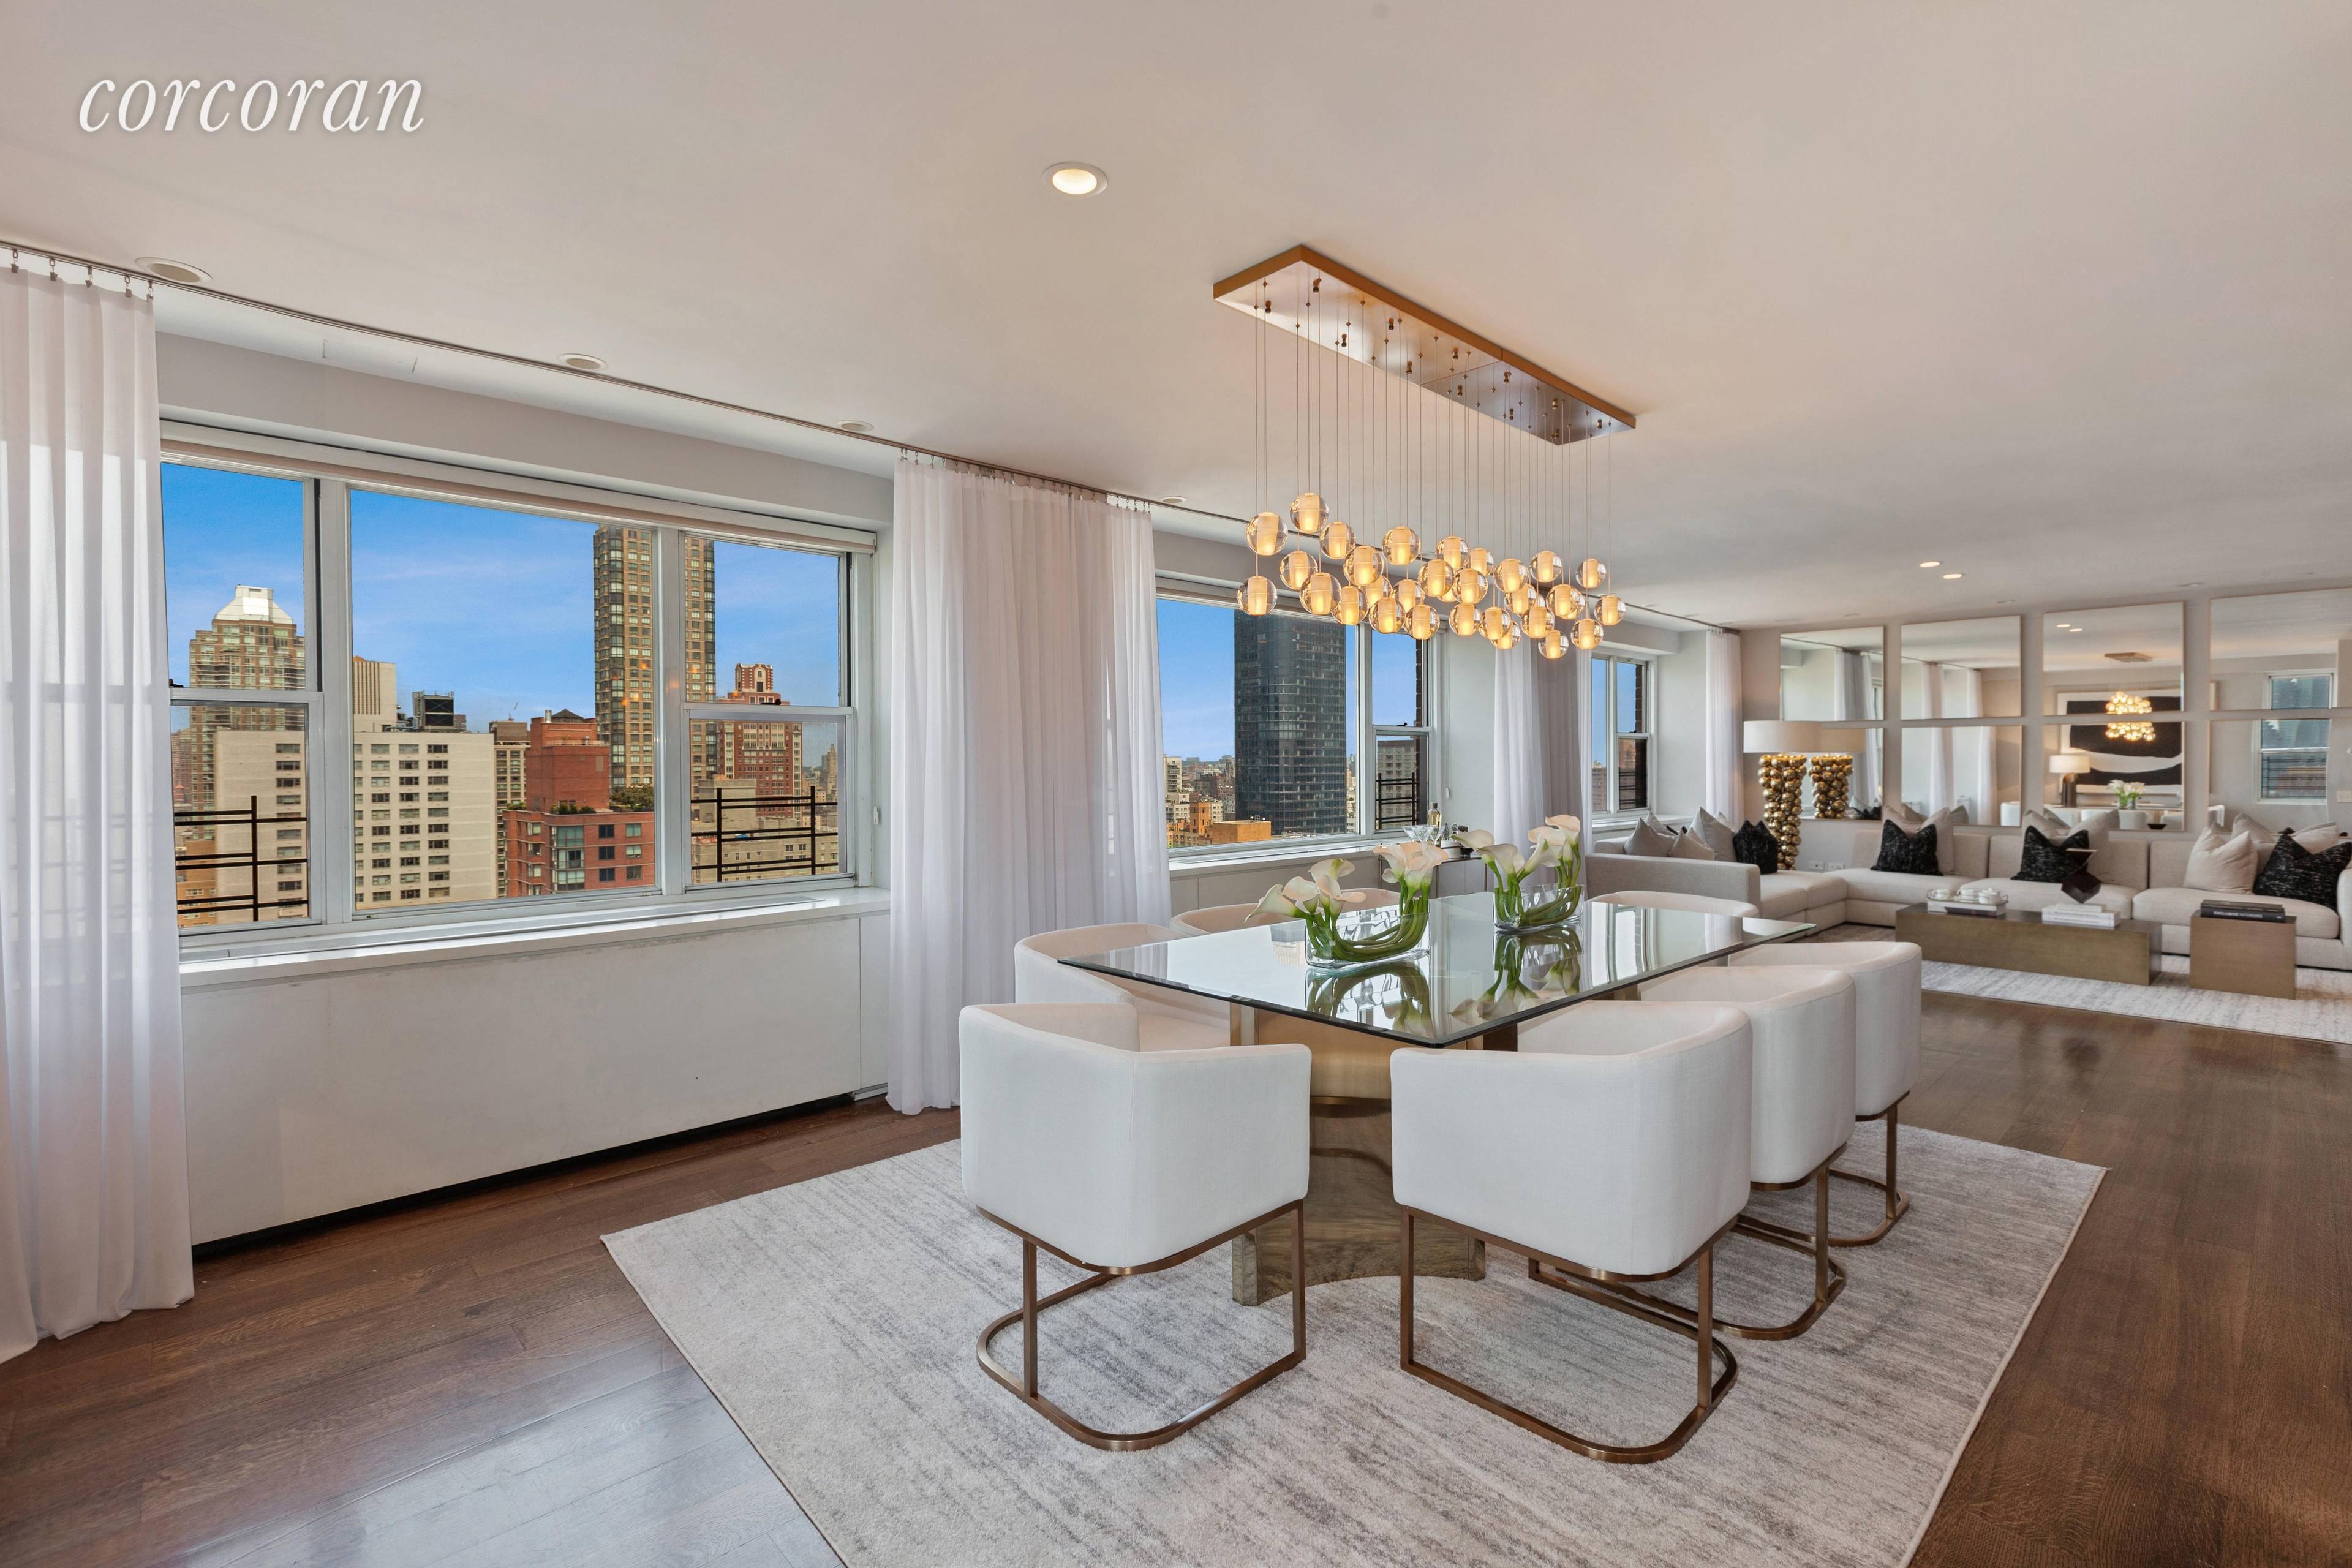 Breathtaking Penthouse apartment with four bedrooms and five full baths.